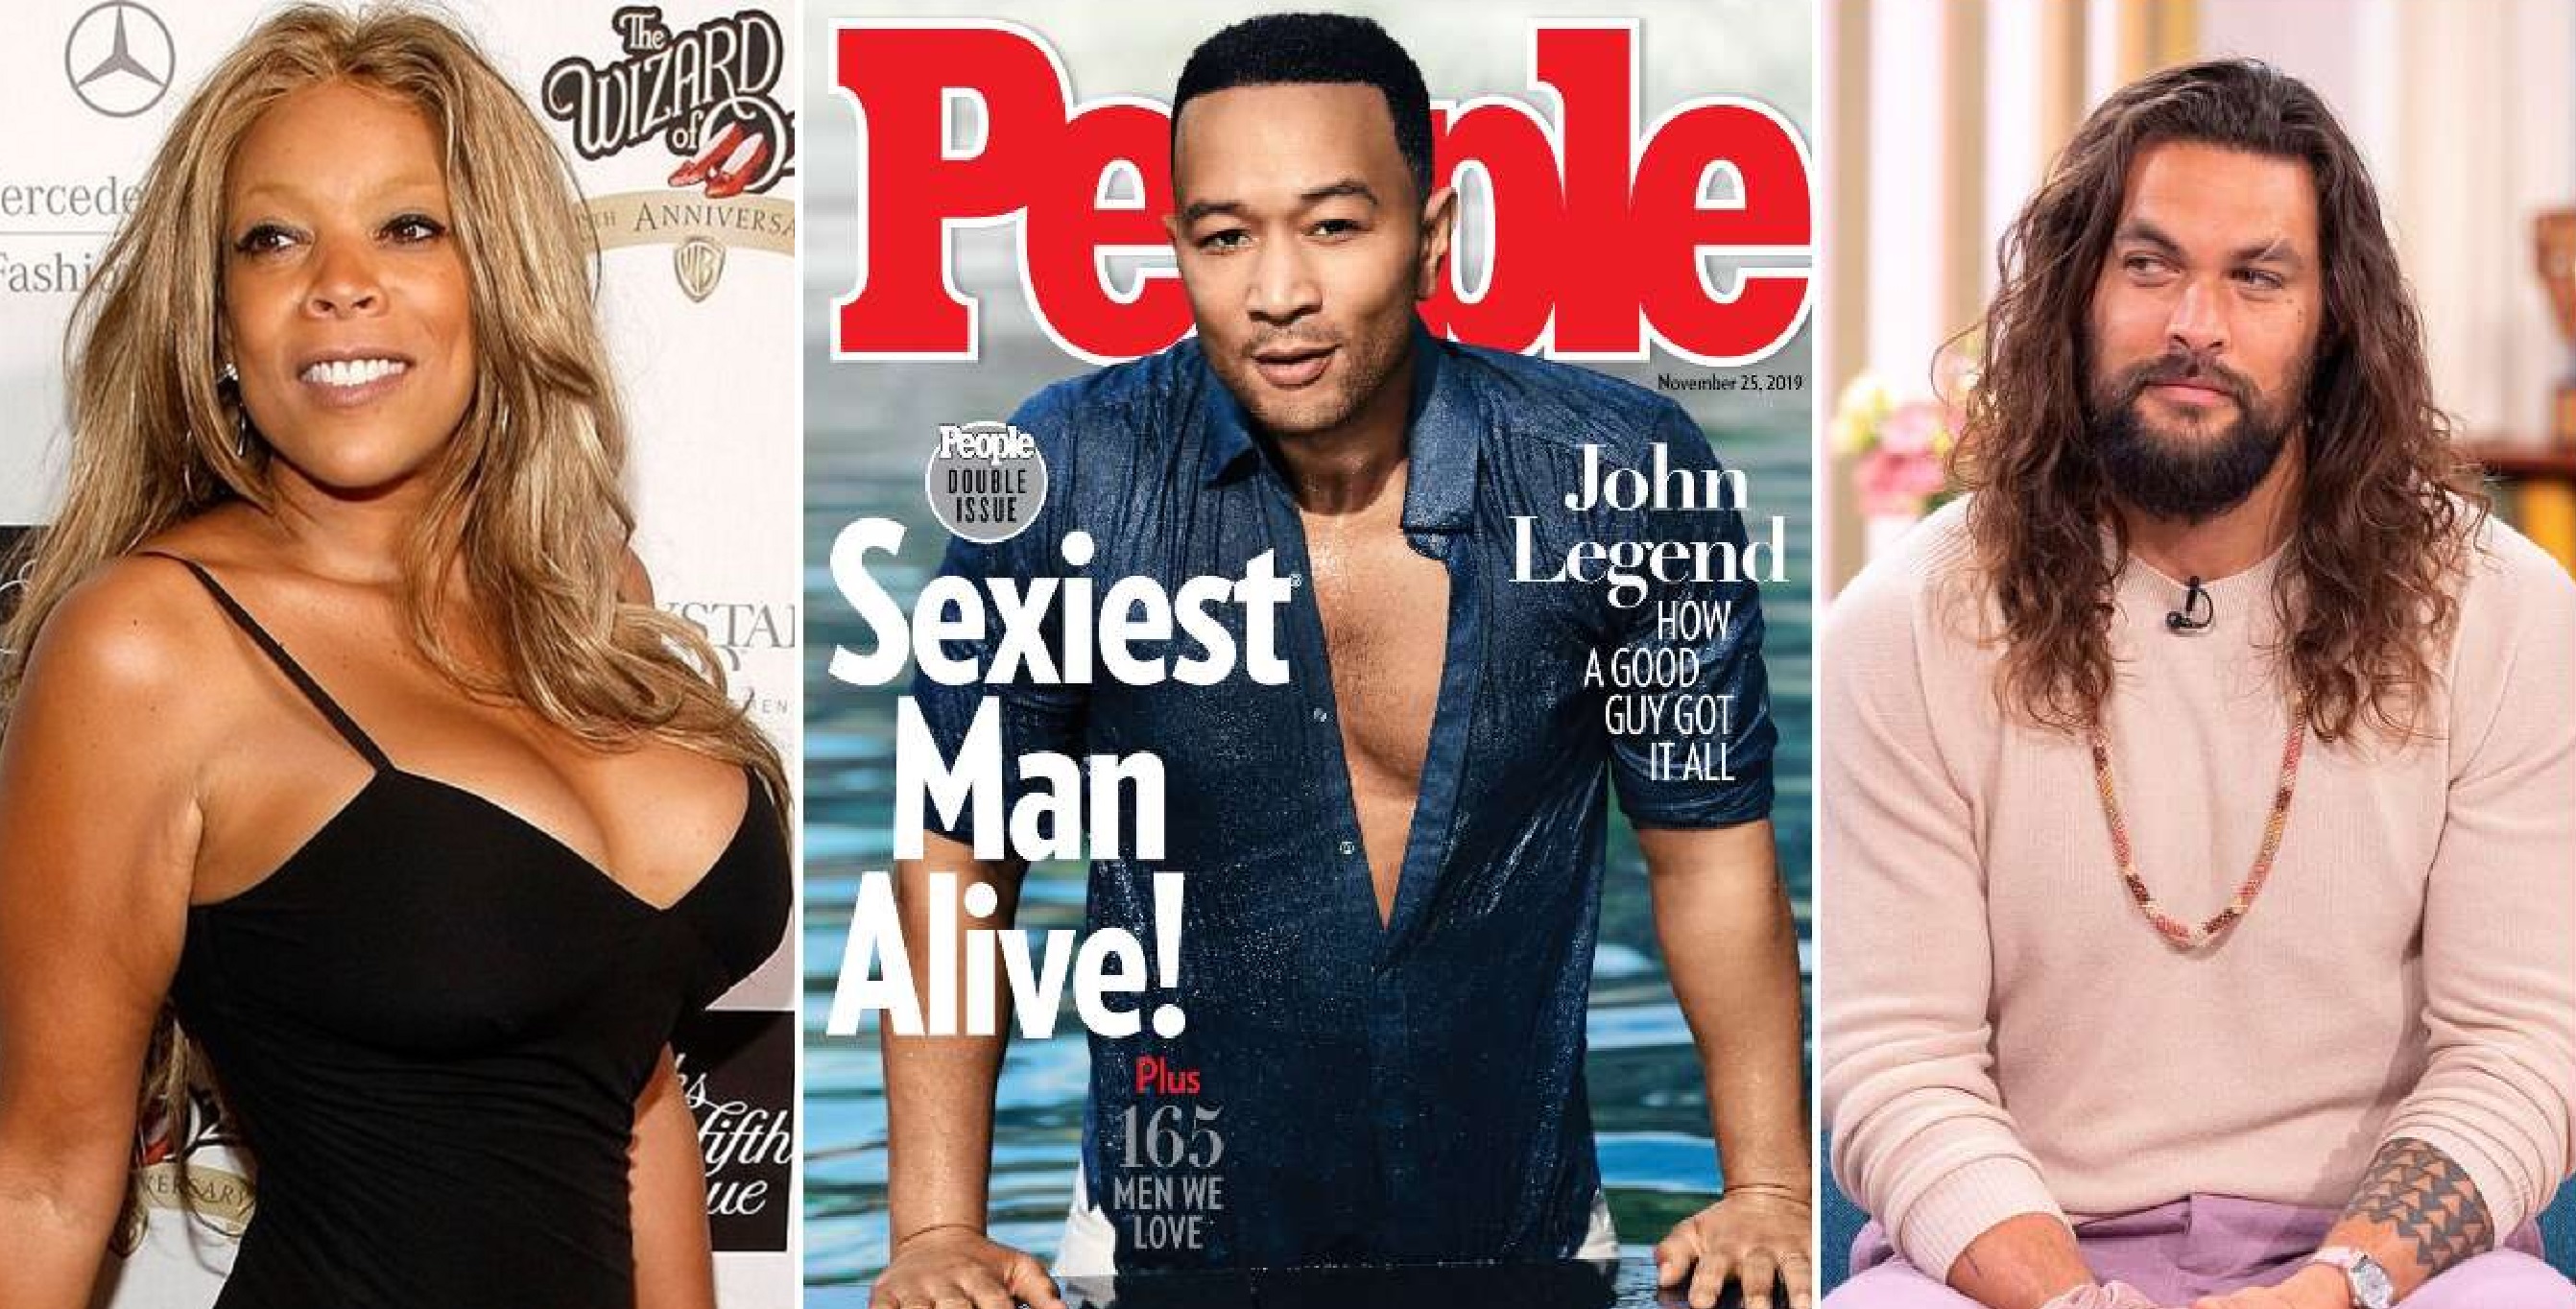 Wendy Williams Says She’d Rather Want Jason Mamoa Win ‘Sexiest Man’ Than John Legend